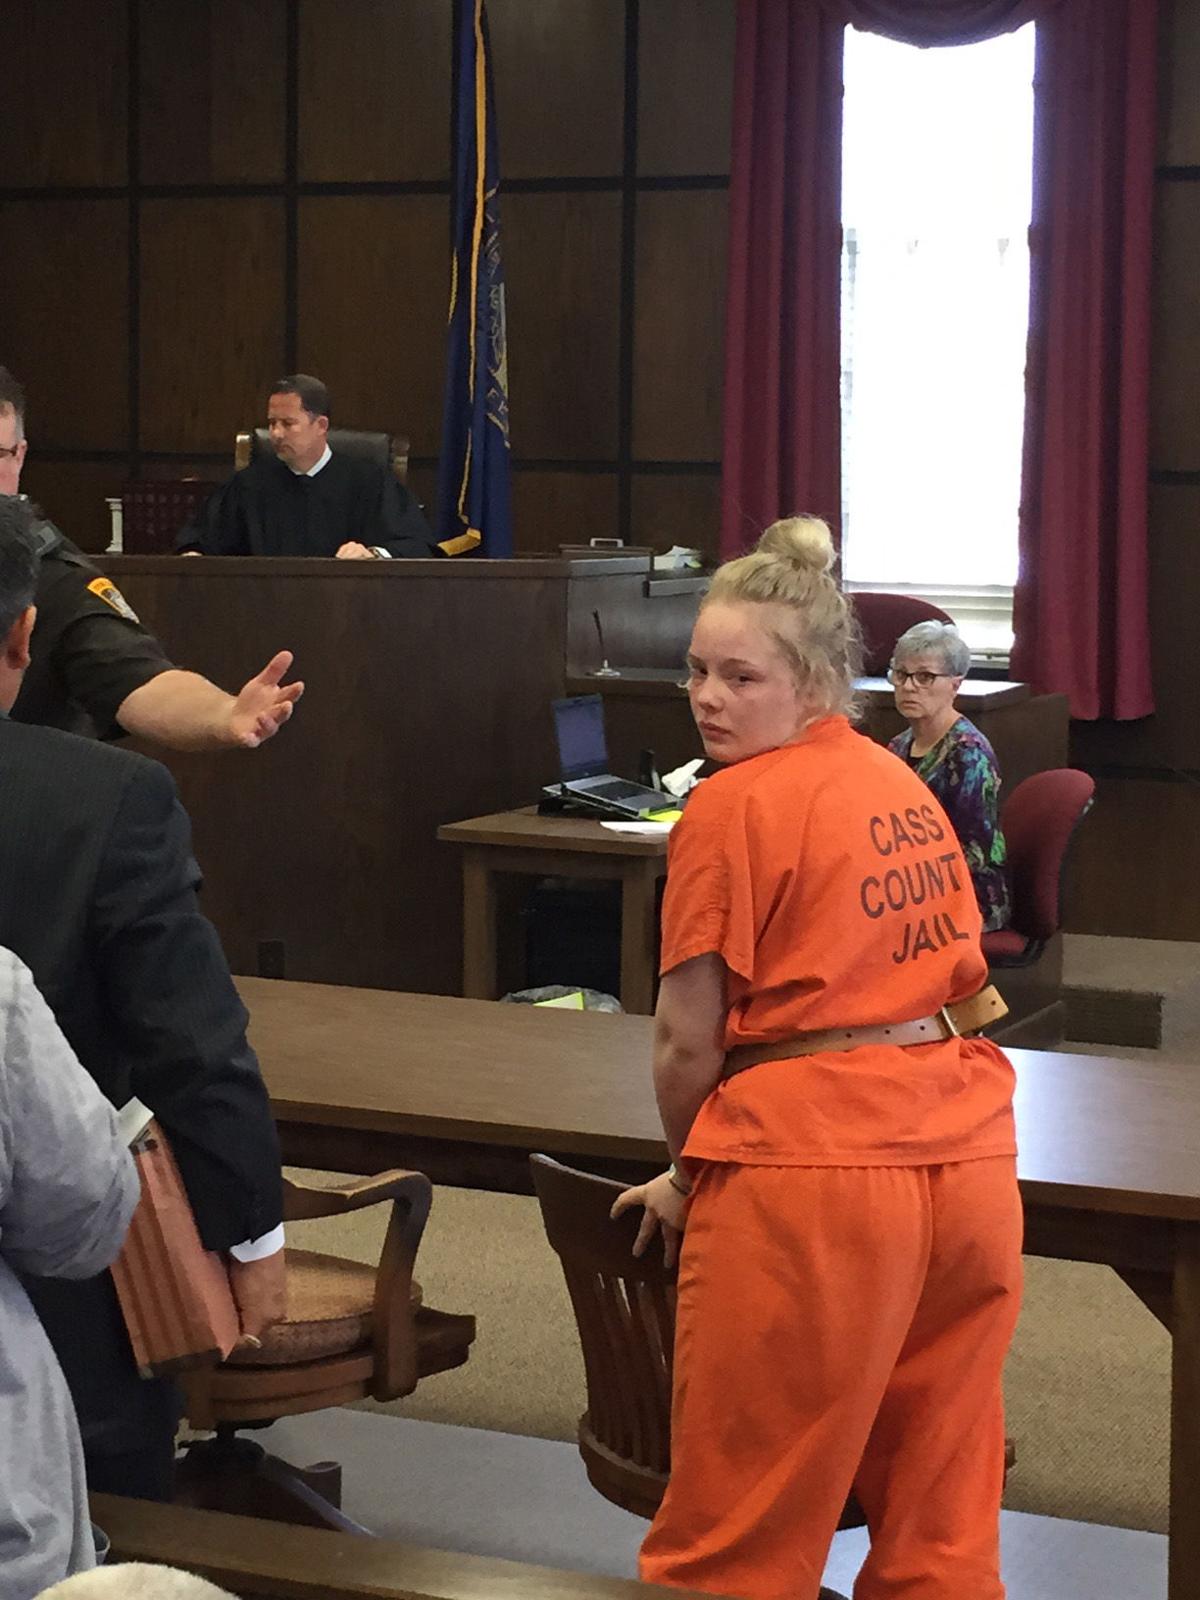 Nebraska City Teen Pleads Guilty To Killing Rival By Running Her Over 